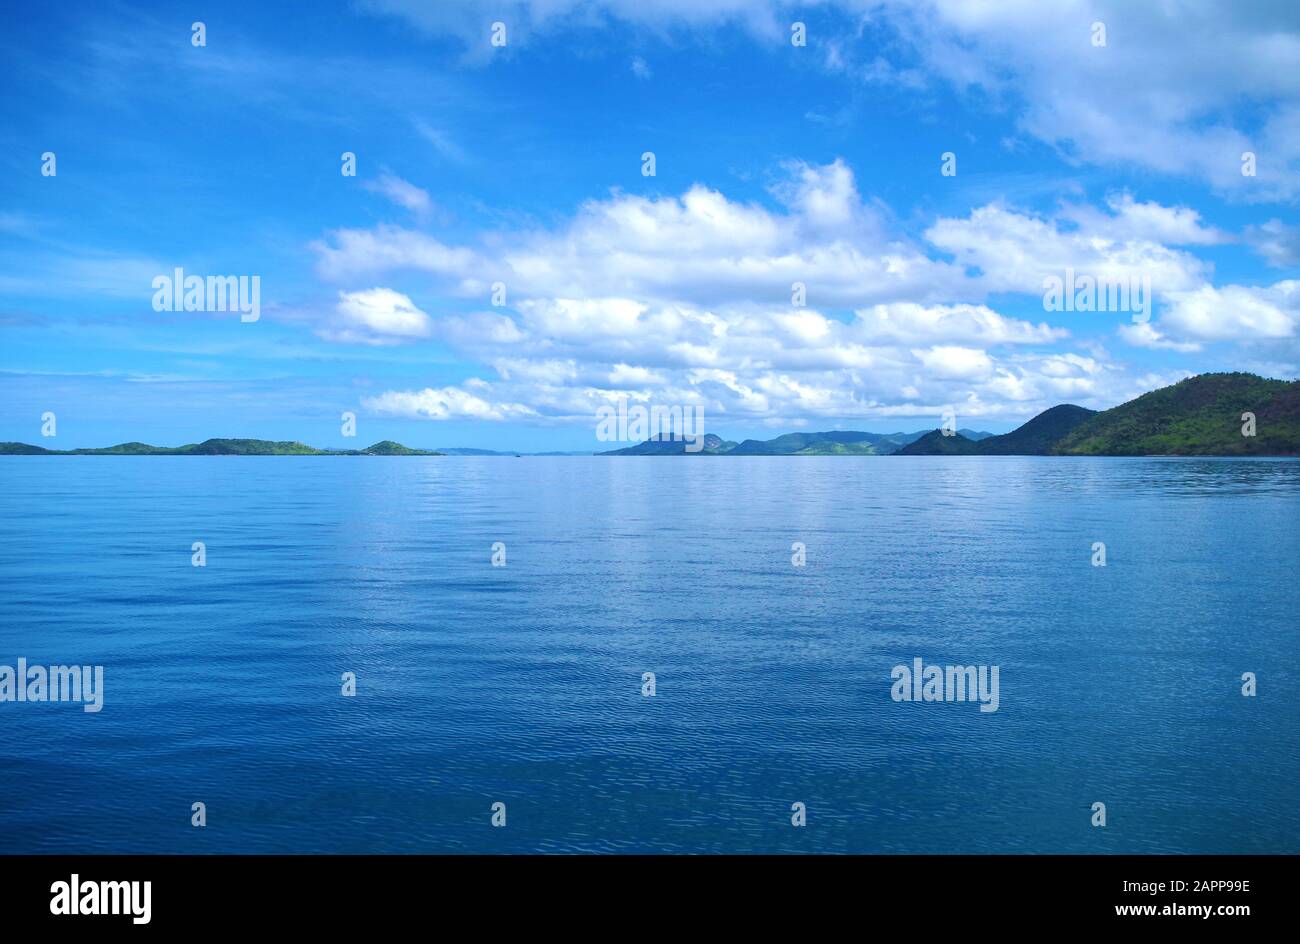 Forested islands in the Philippines archipelago. Isles are surrounded by the blue, calm waters of the ocean and azure, clear sky. Stock Photo